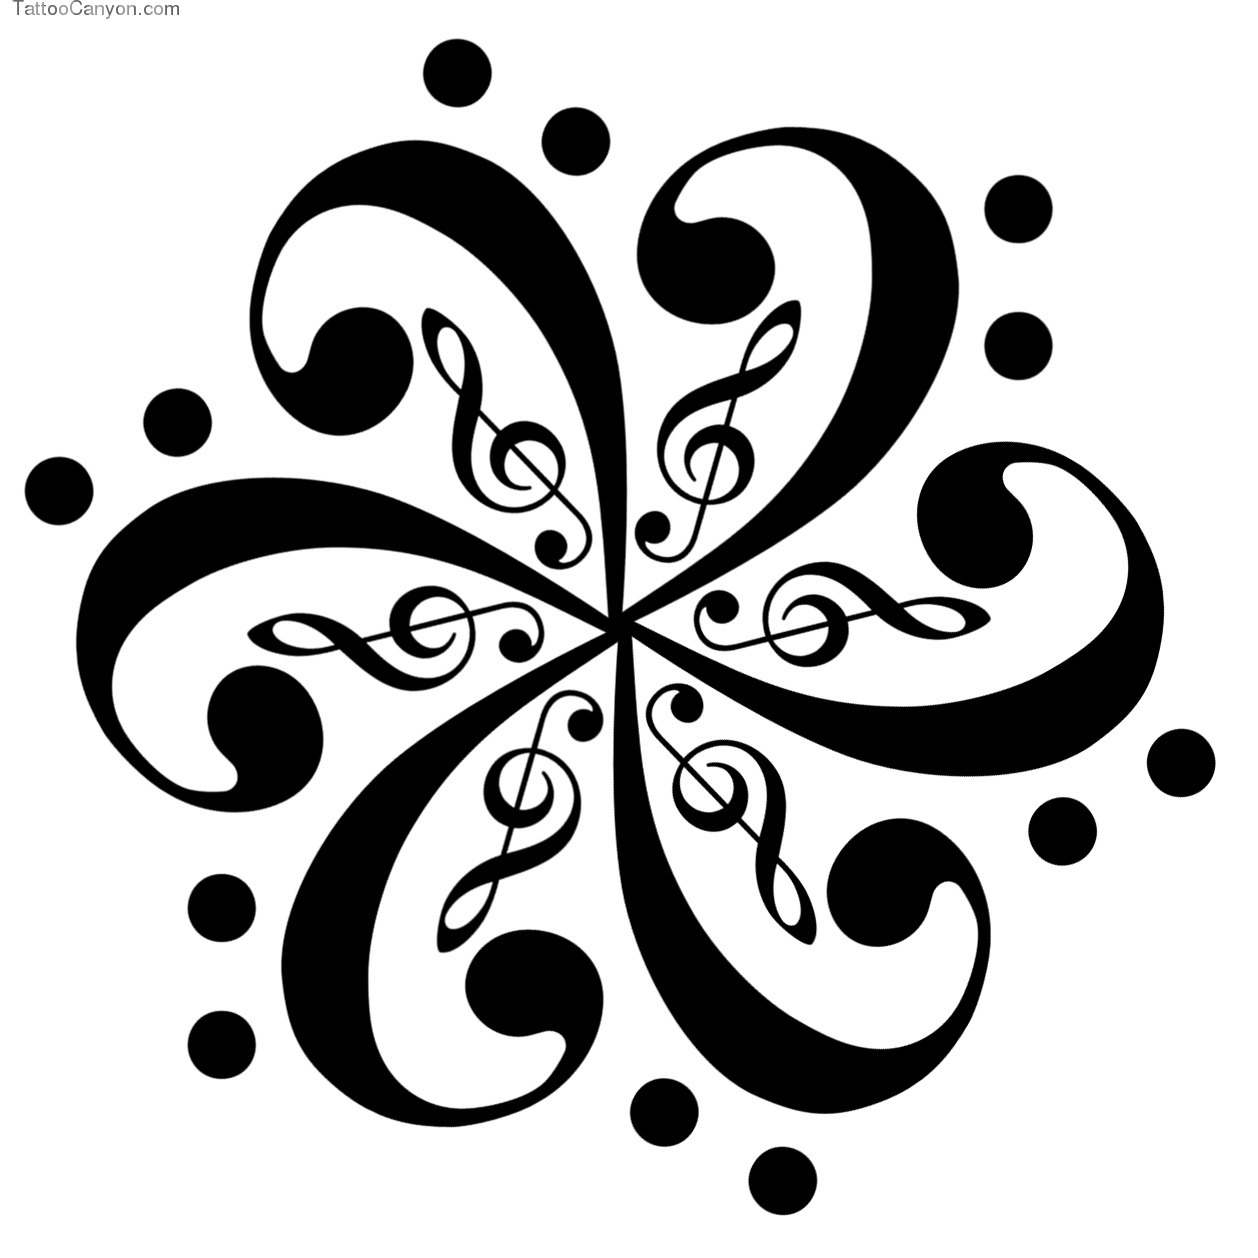 Music Notes Symbols Tattoos | Clipart Panda - Free Clipart Images